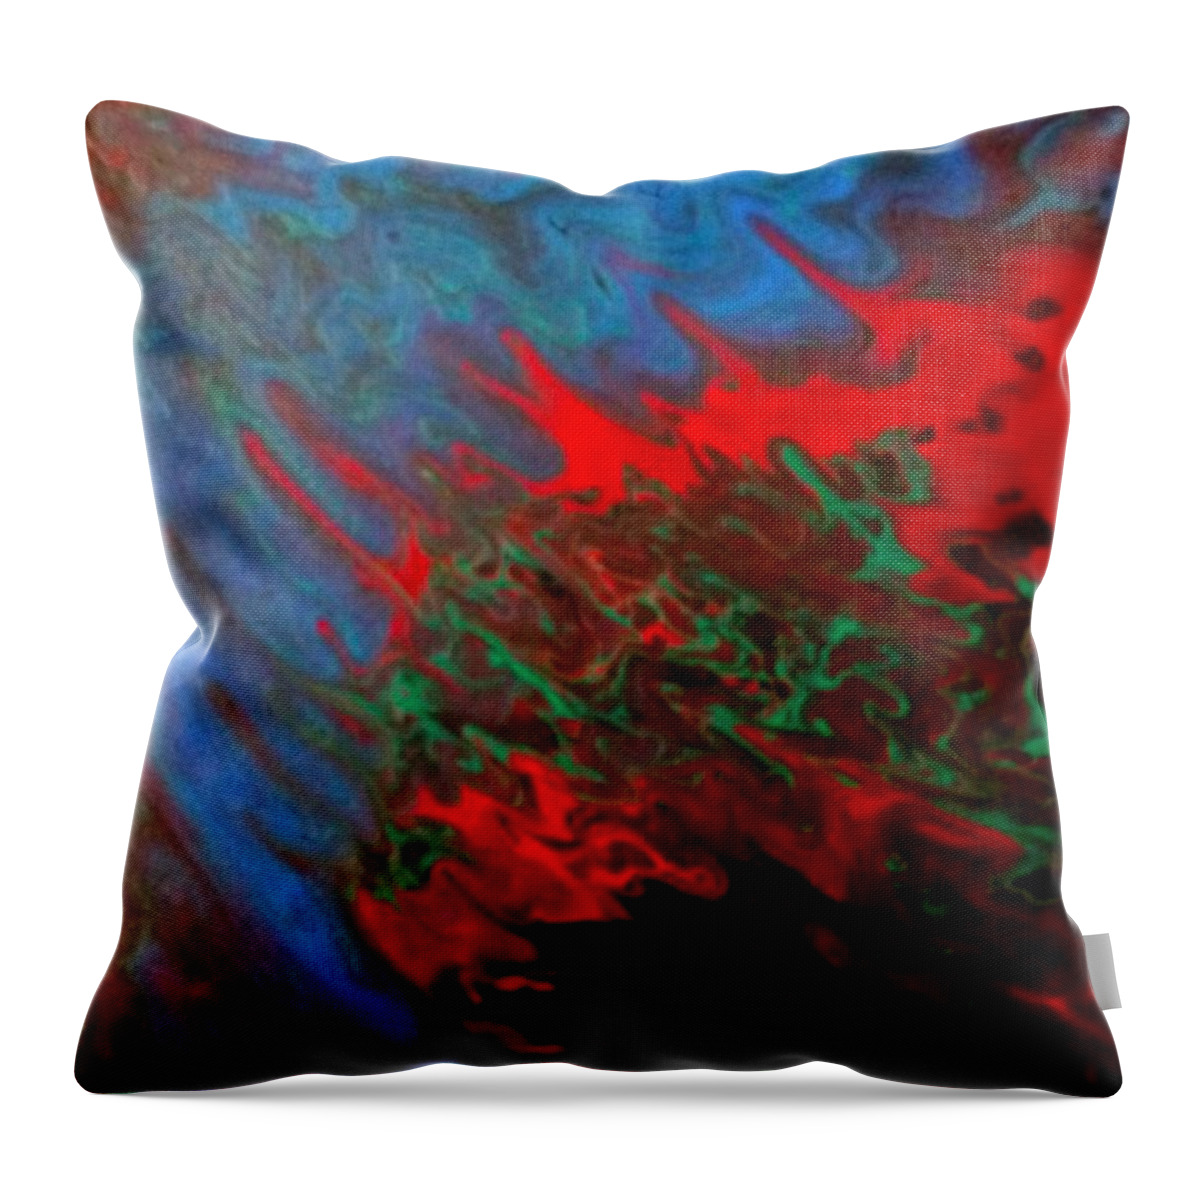 Horns Throw Pillow featuring the painting Sea Horns by Anna Adams